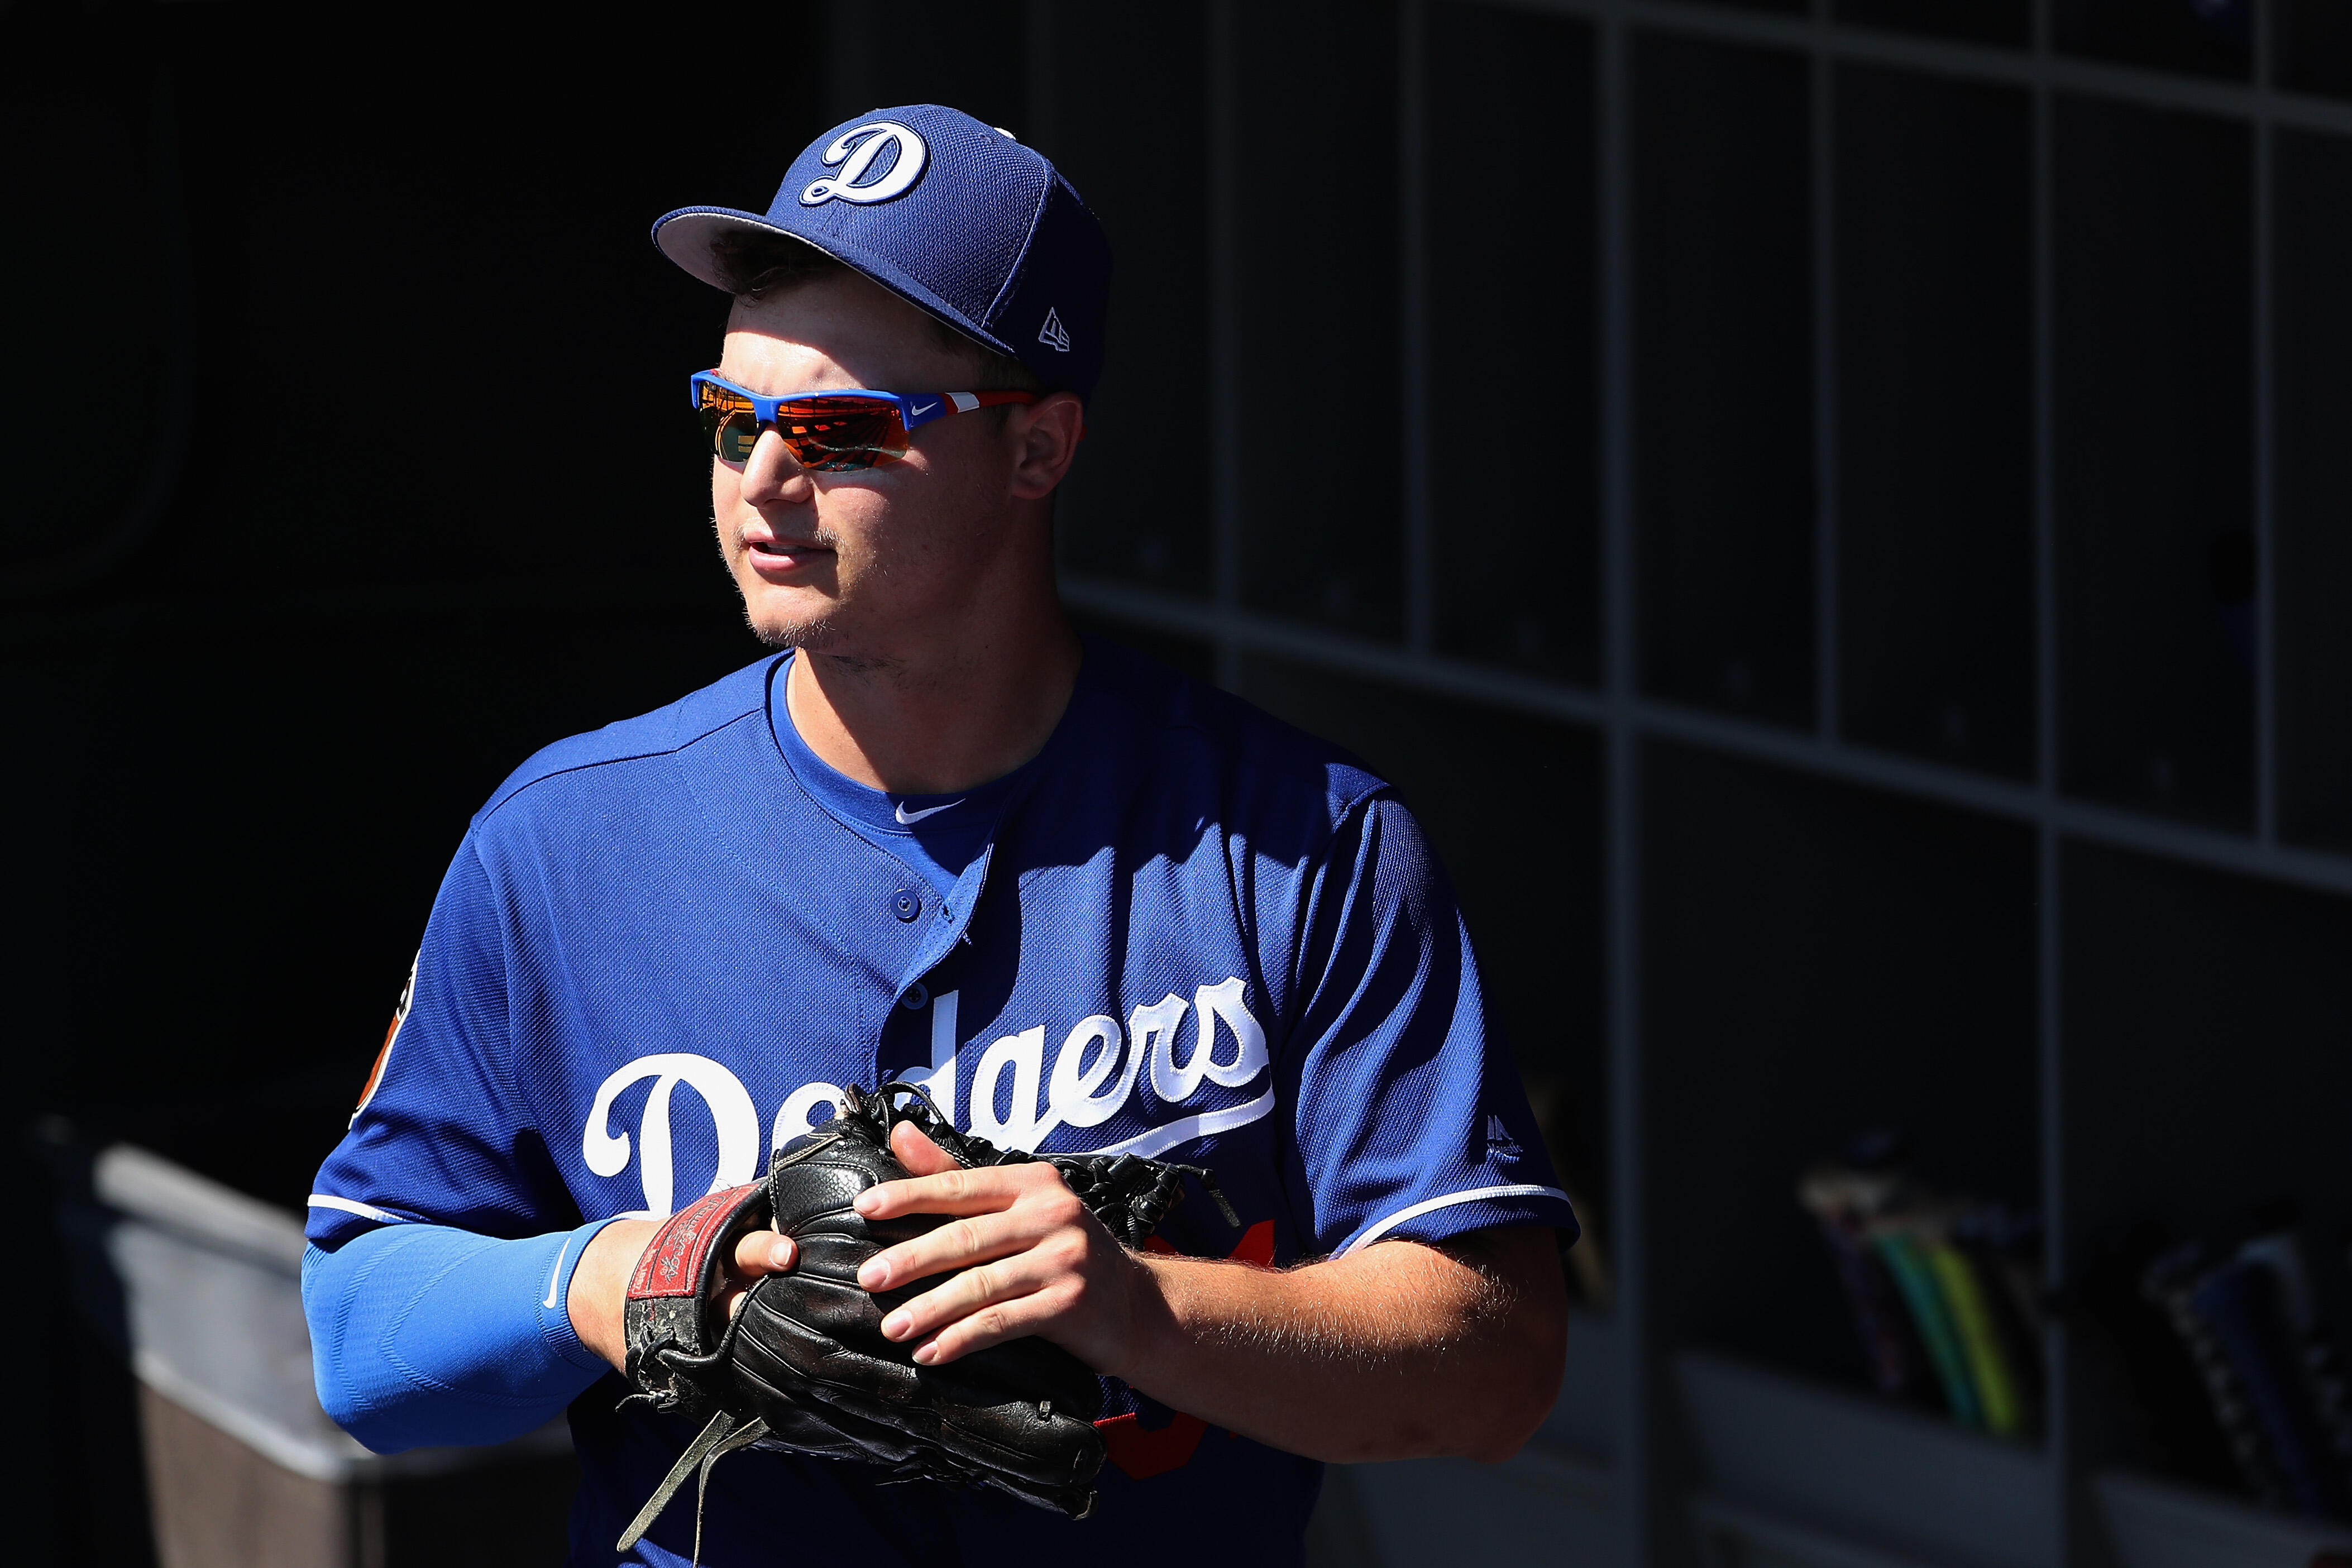 GLENDALE, AZ - MARCH 11:  Joc Pederson #31 of the Los Angeles Dodgers walks in the dugout before the MLB spring training game against the Los Angeles Angels at Camelback Ranch on March 11, 2017 in Glendale, Arizona.  (Photo by Christian Petersen/Getty Ima